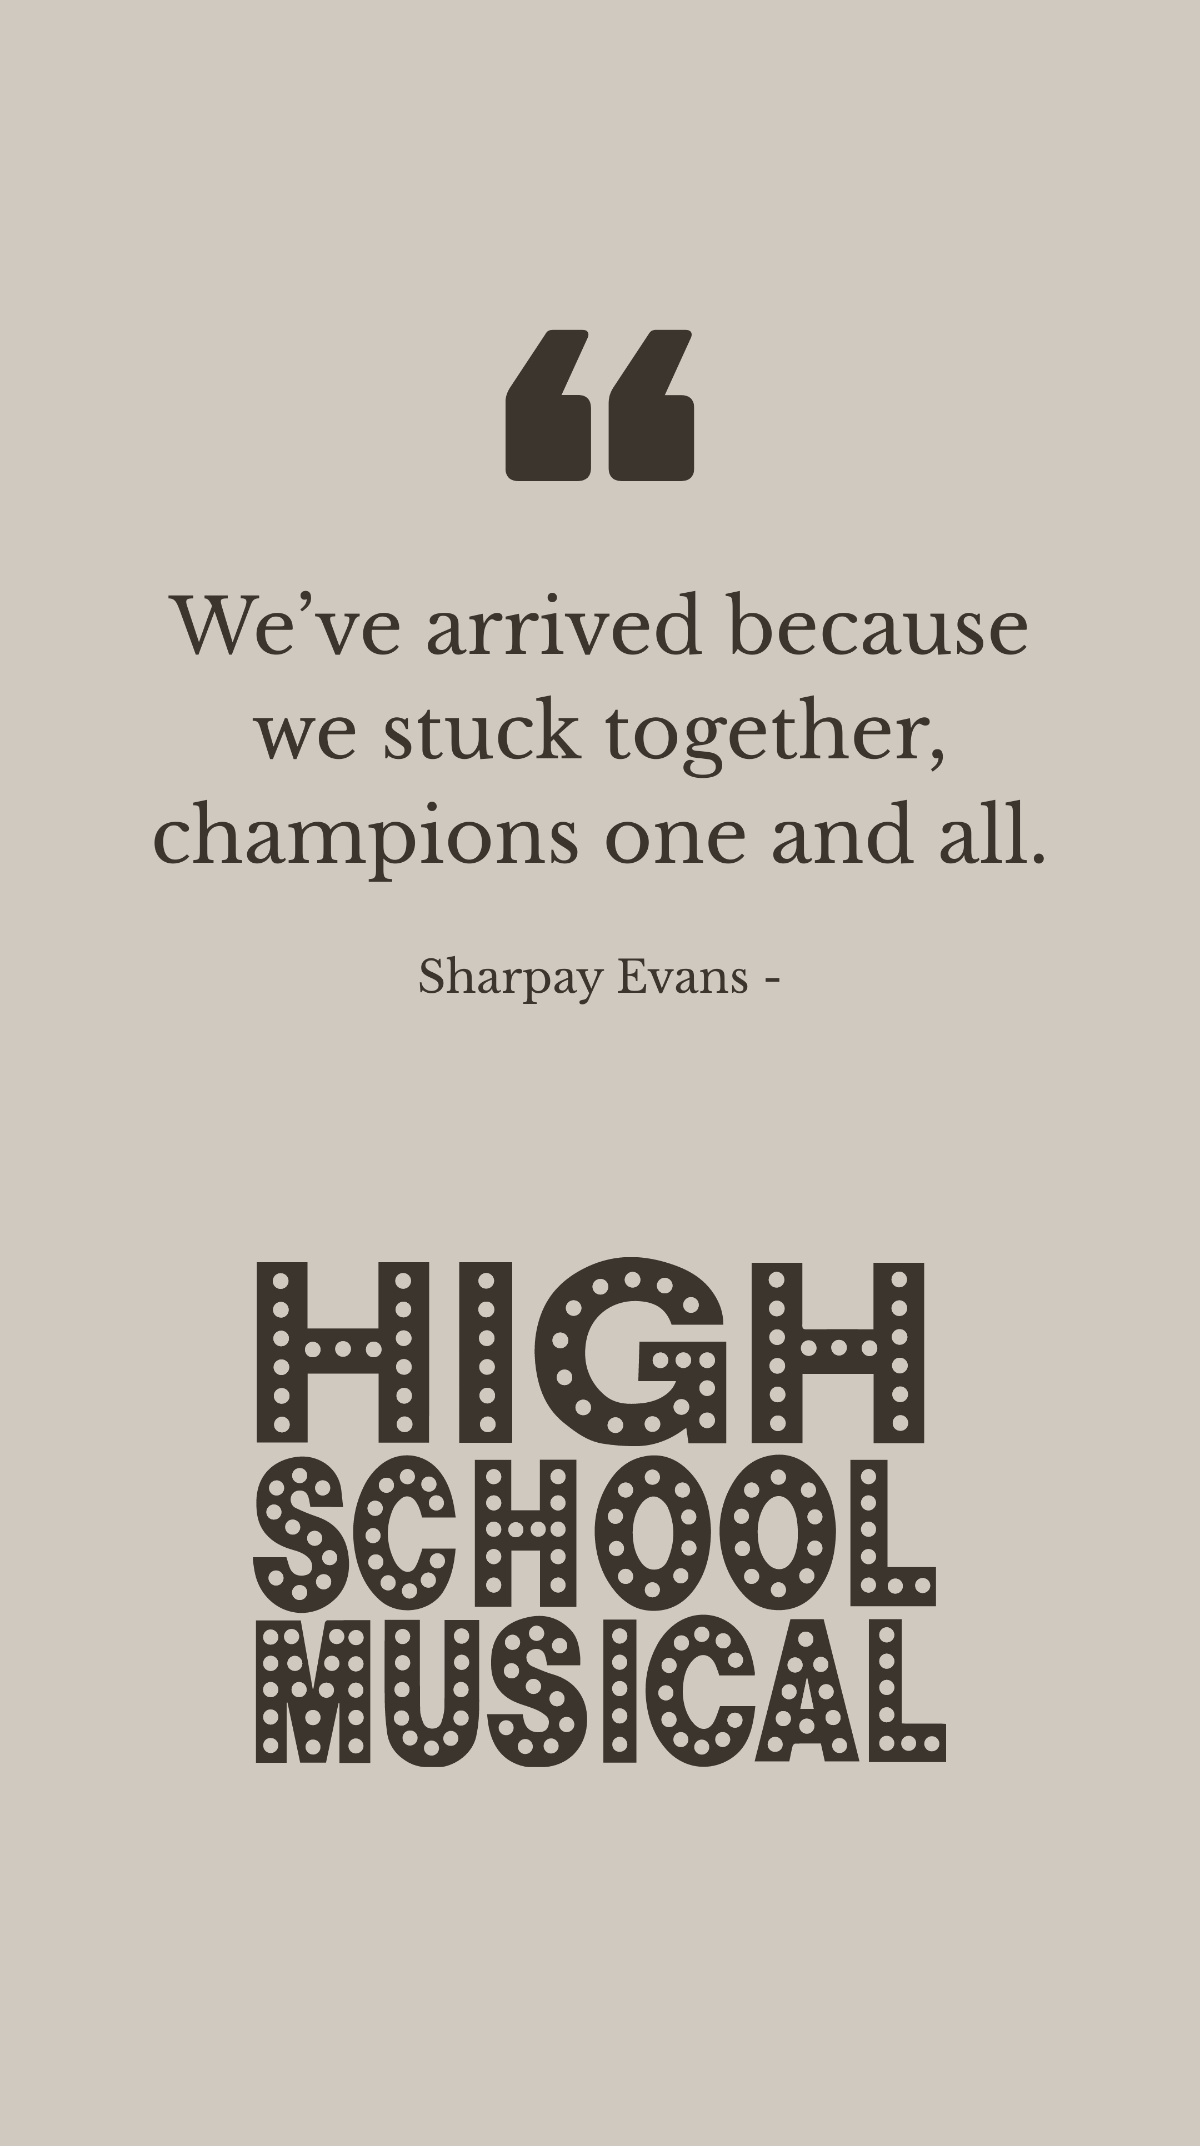 Sharpay Evans - We’ve arrived because we stuck together, champions one and all.